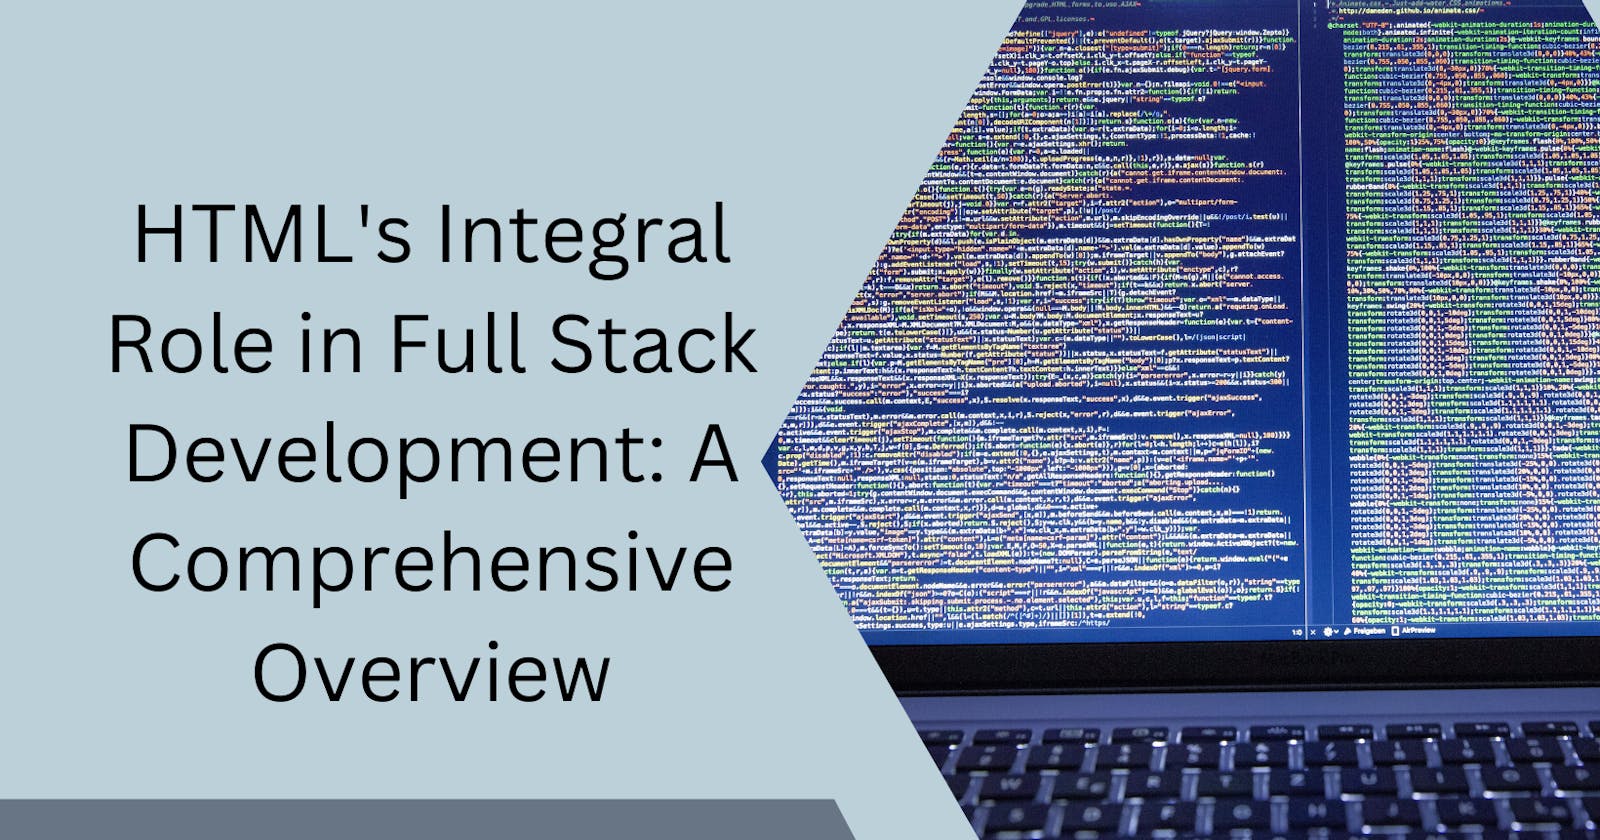 HTML's Integral Role in Full Stack Development: A Comprehensive Overview